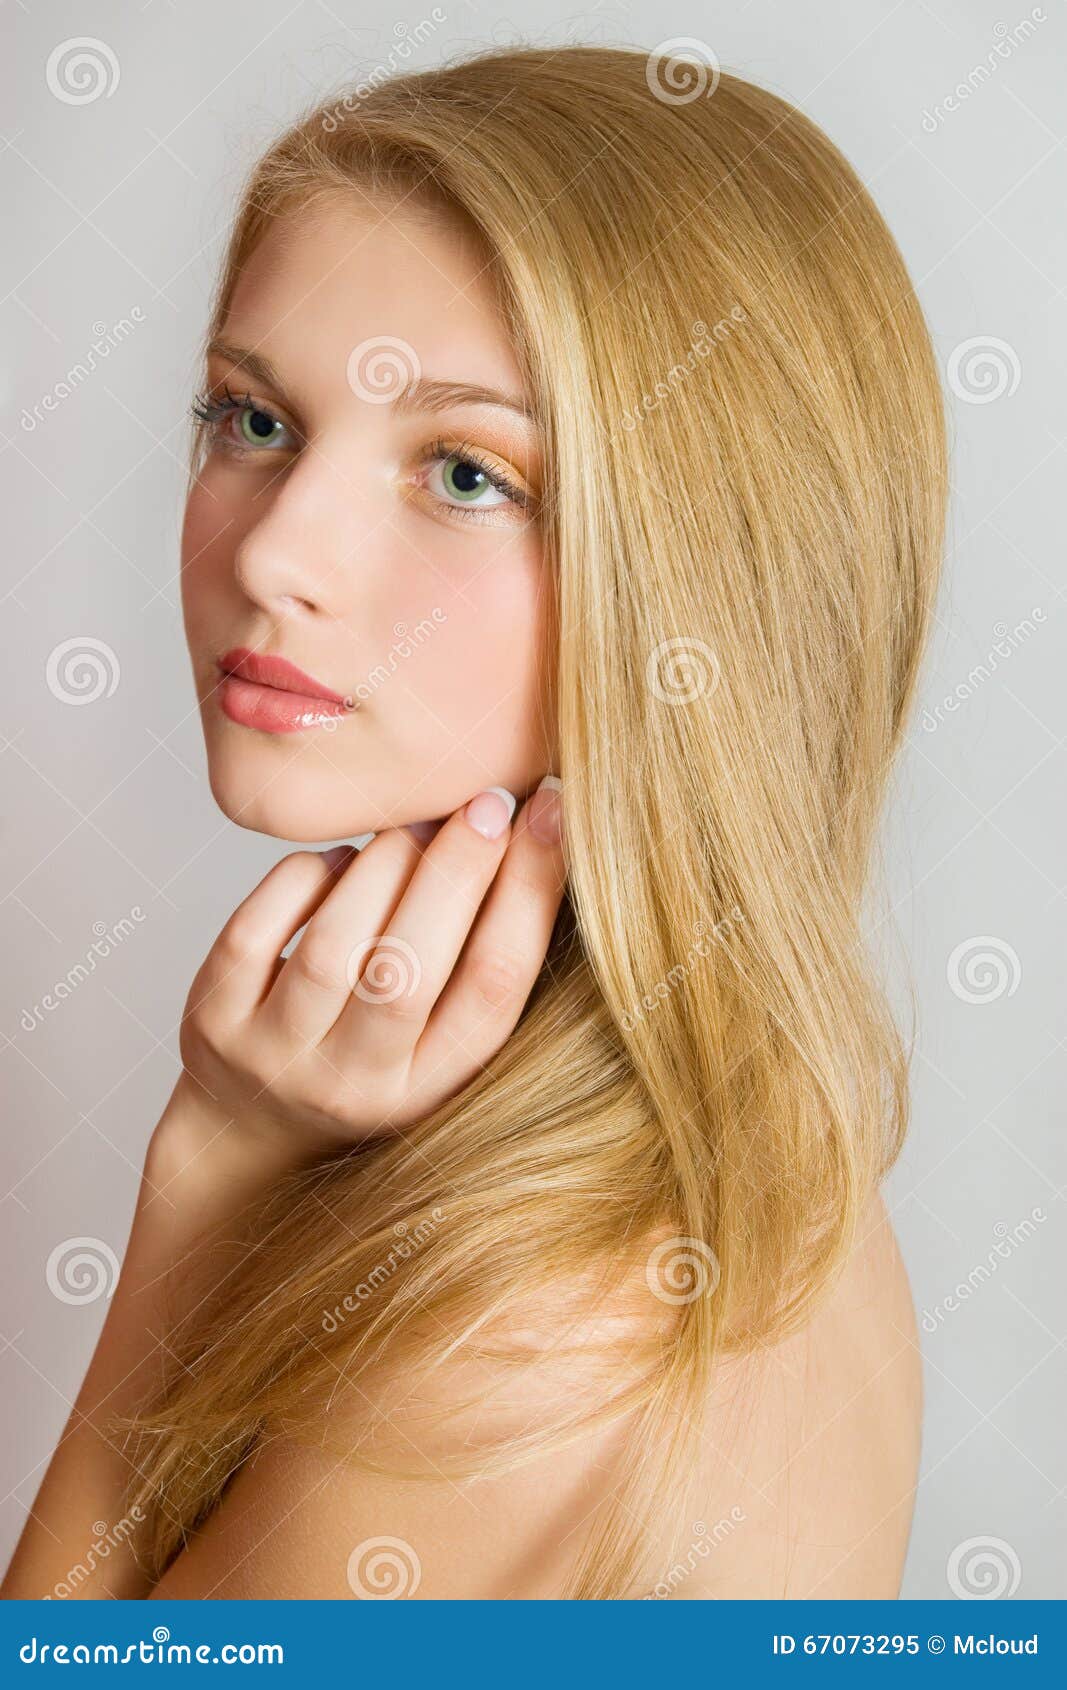 With hair woman blonde of pictures pretty Beautiful Woman